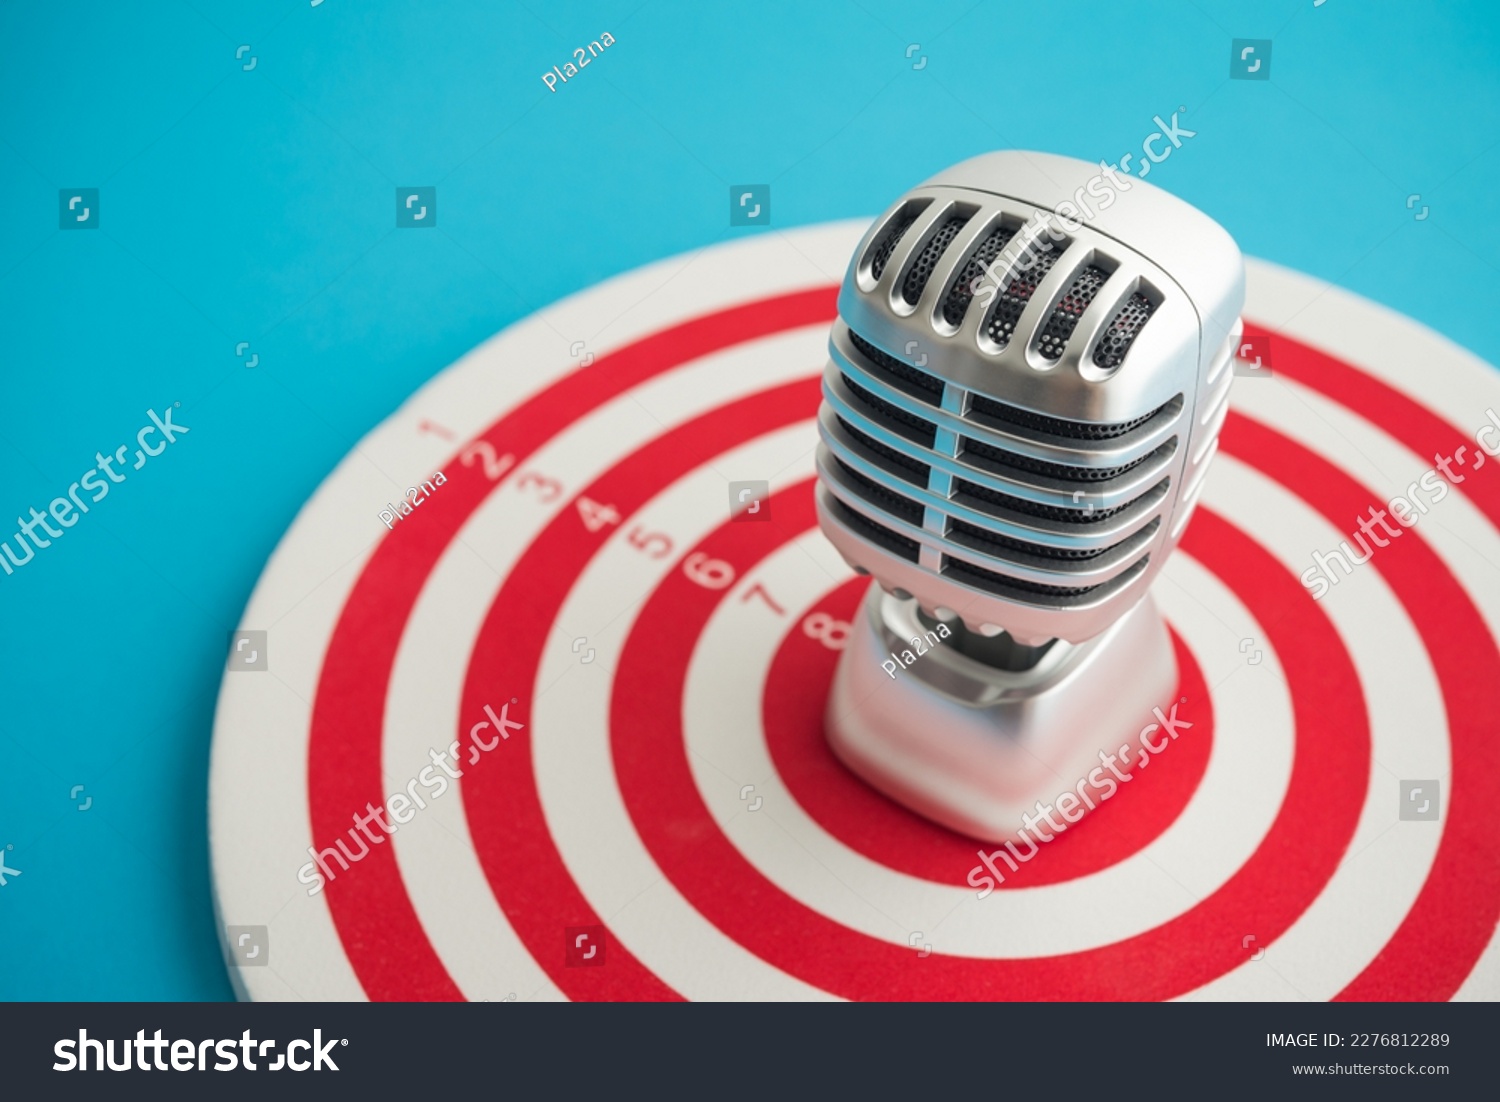 Retro microphone on center of target blue background copy space. Focus on customer feedback, satisfaction, review need for organization improvement and development. Leadership management and strategy. #2276812289